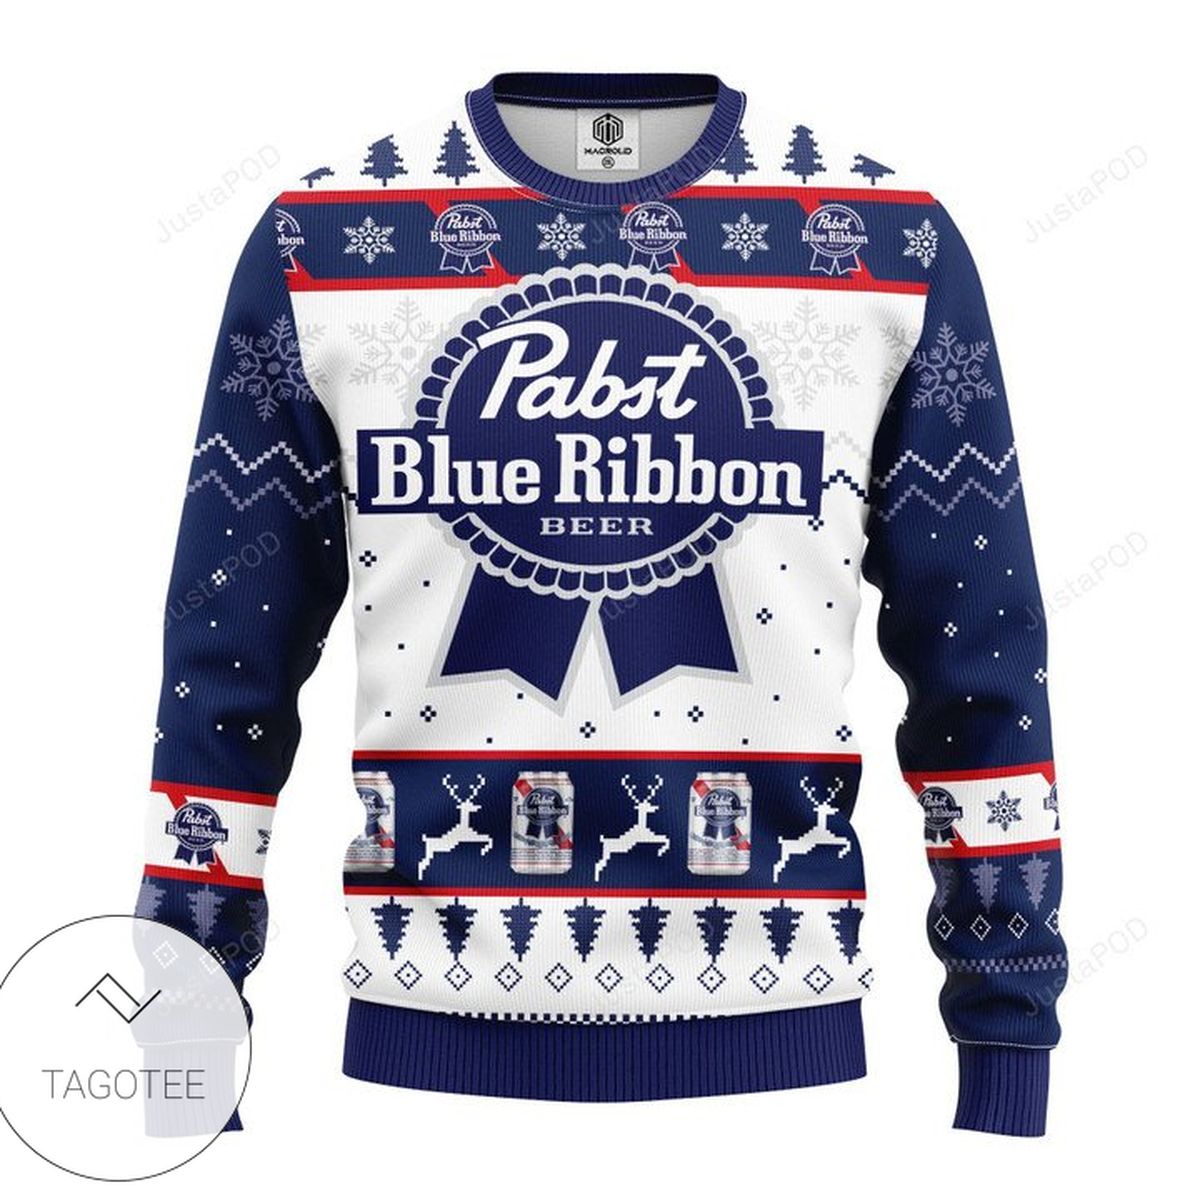 Pabst Blue Beer Ugly Christmas Sweater